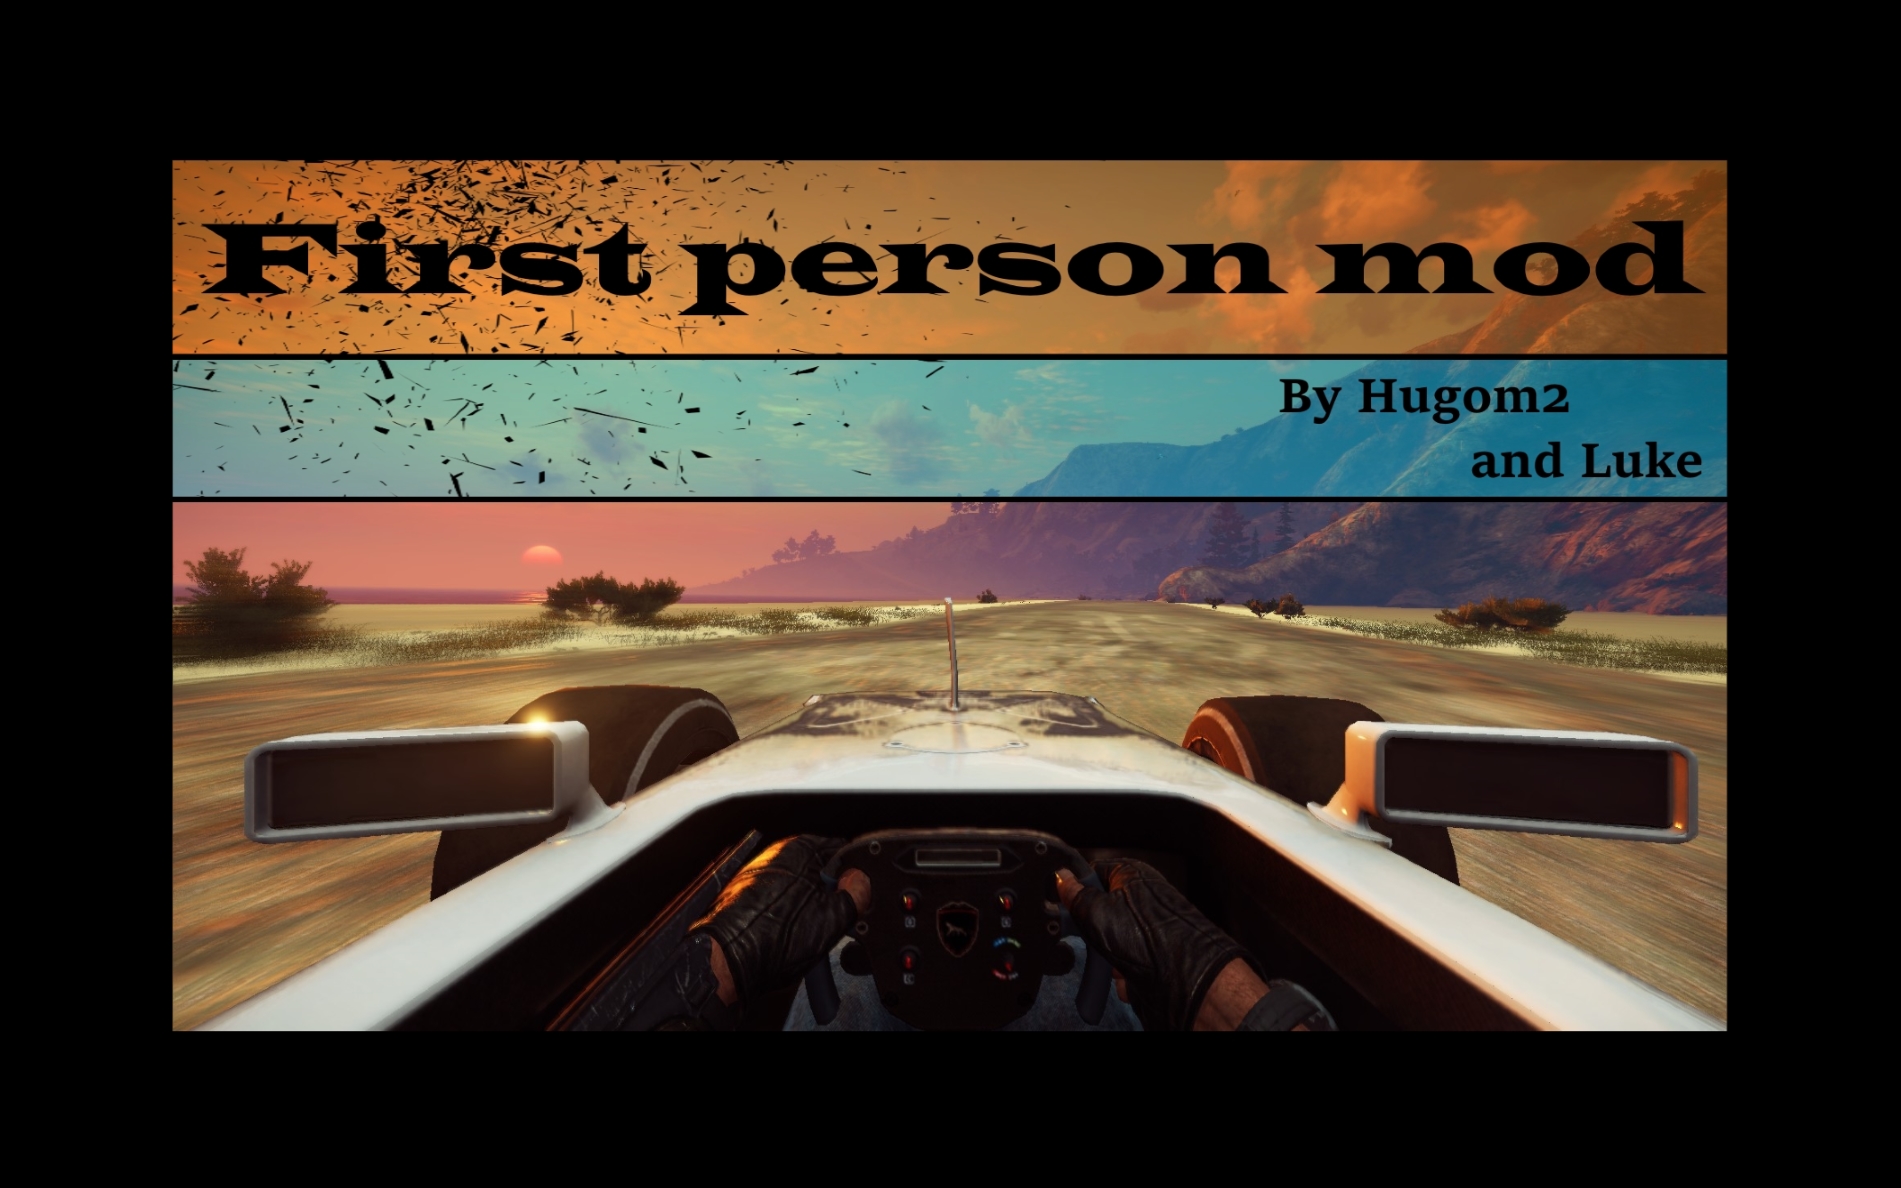 First person